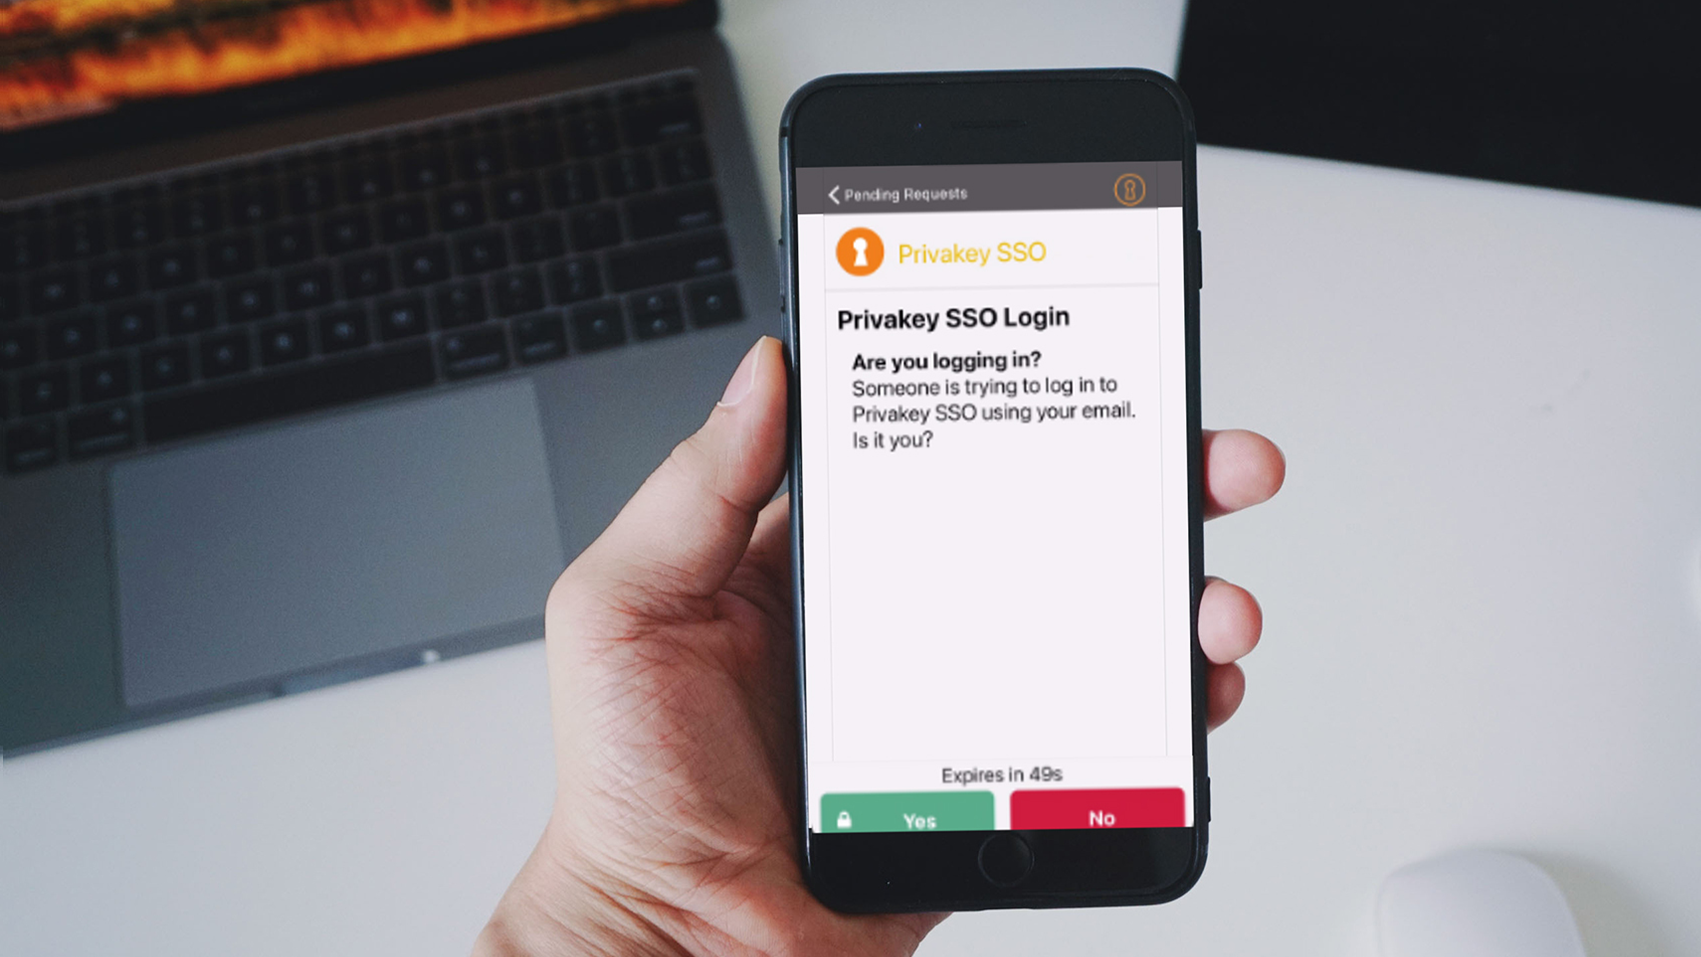  A person holding an iPhone and there is the PrivaKey SSO Login confirmation page asking if the login attempt was the user’s. 